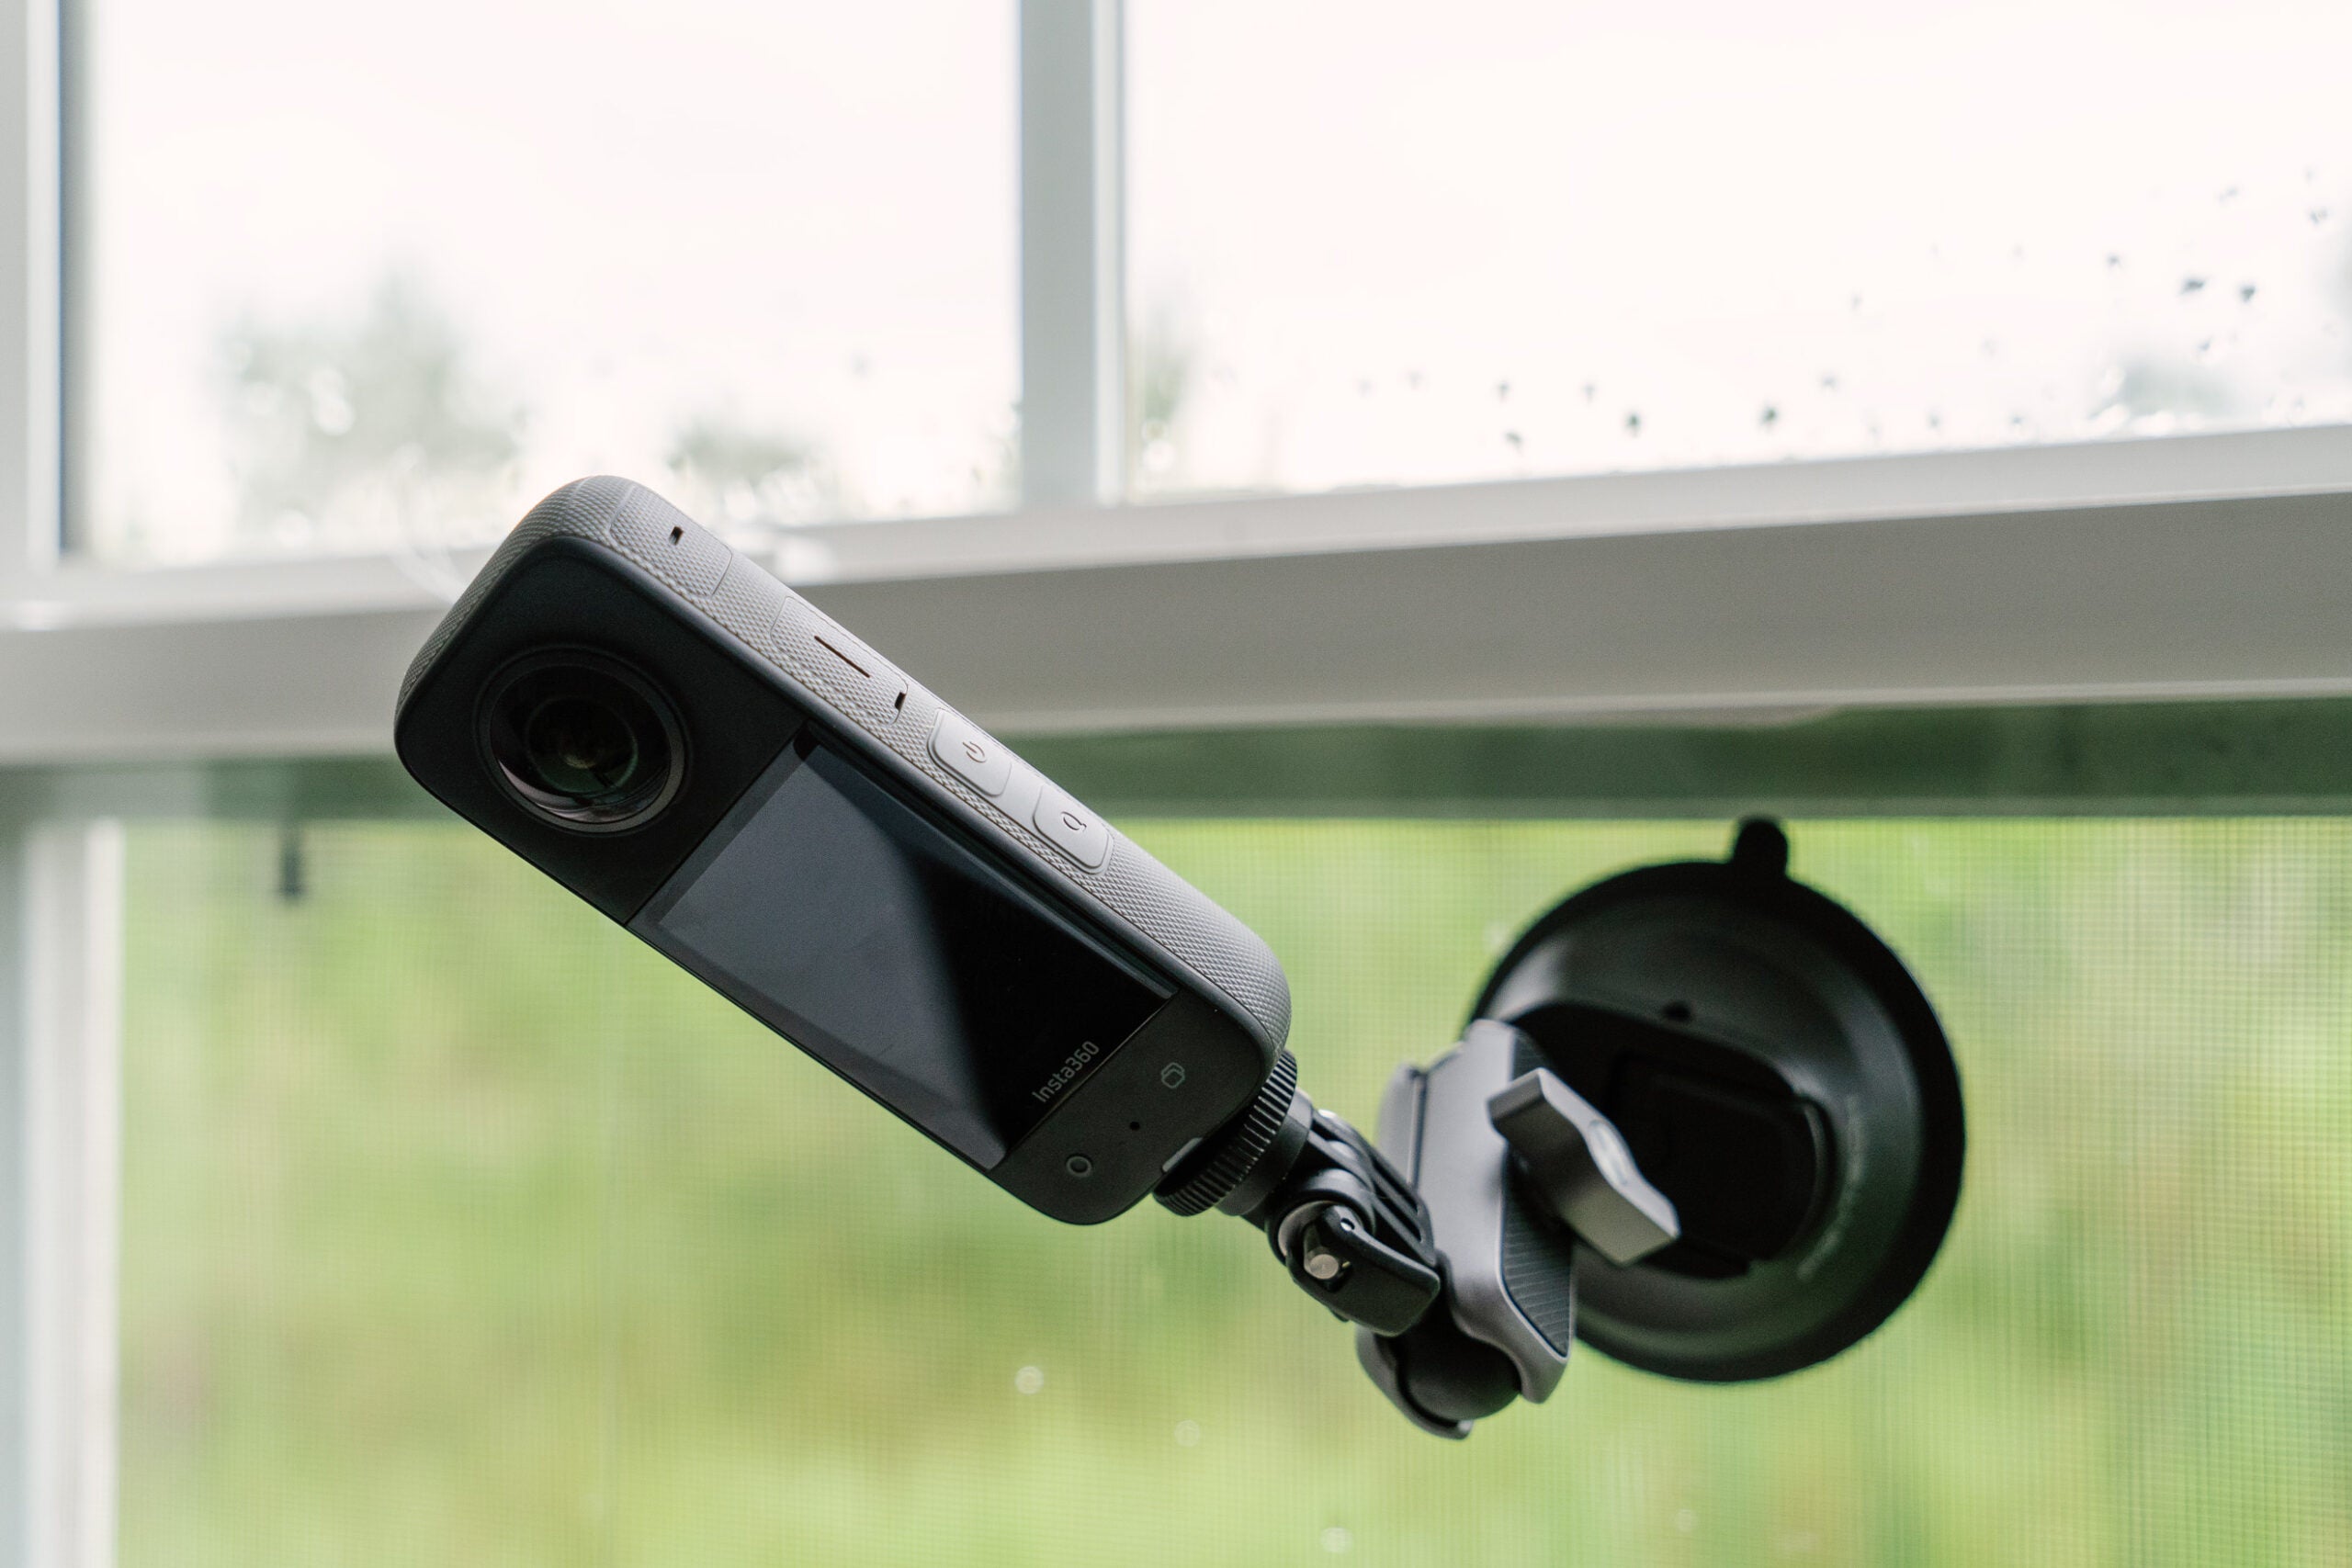 The Insta360 X3 on a window using the suction cup mount